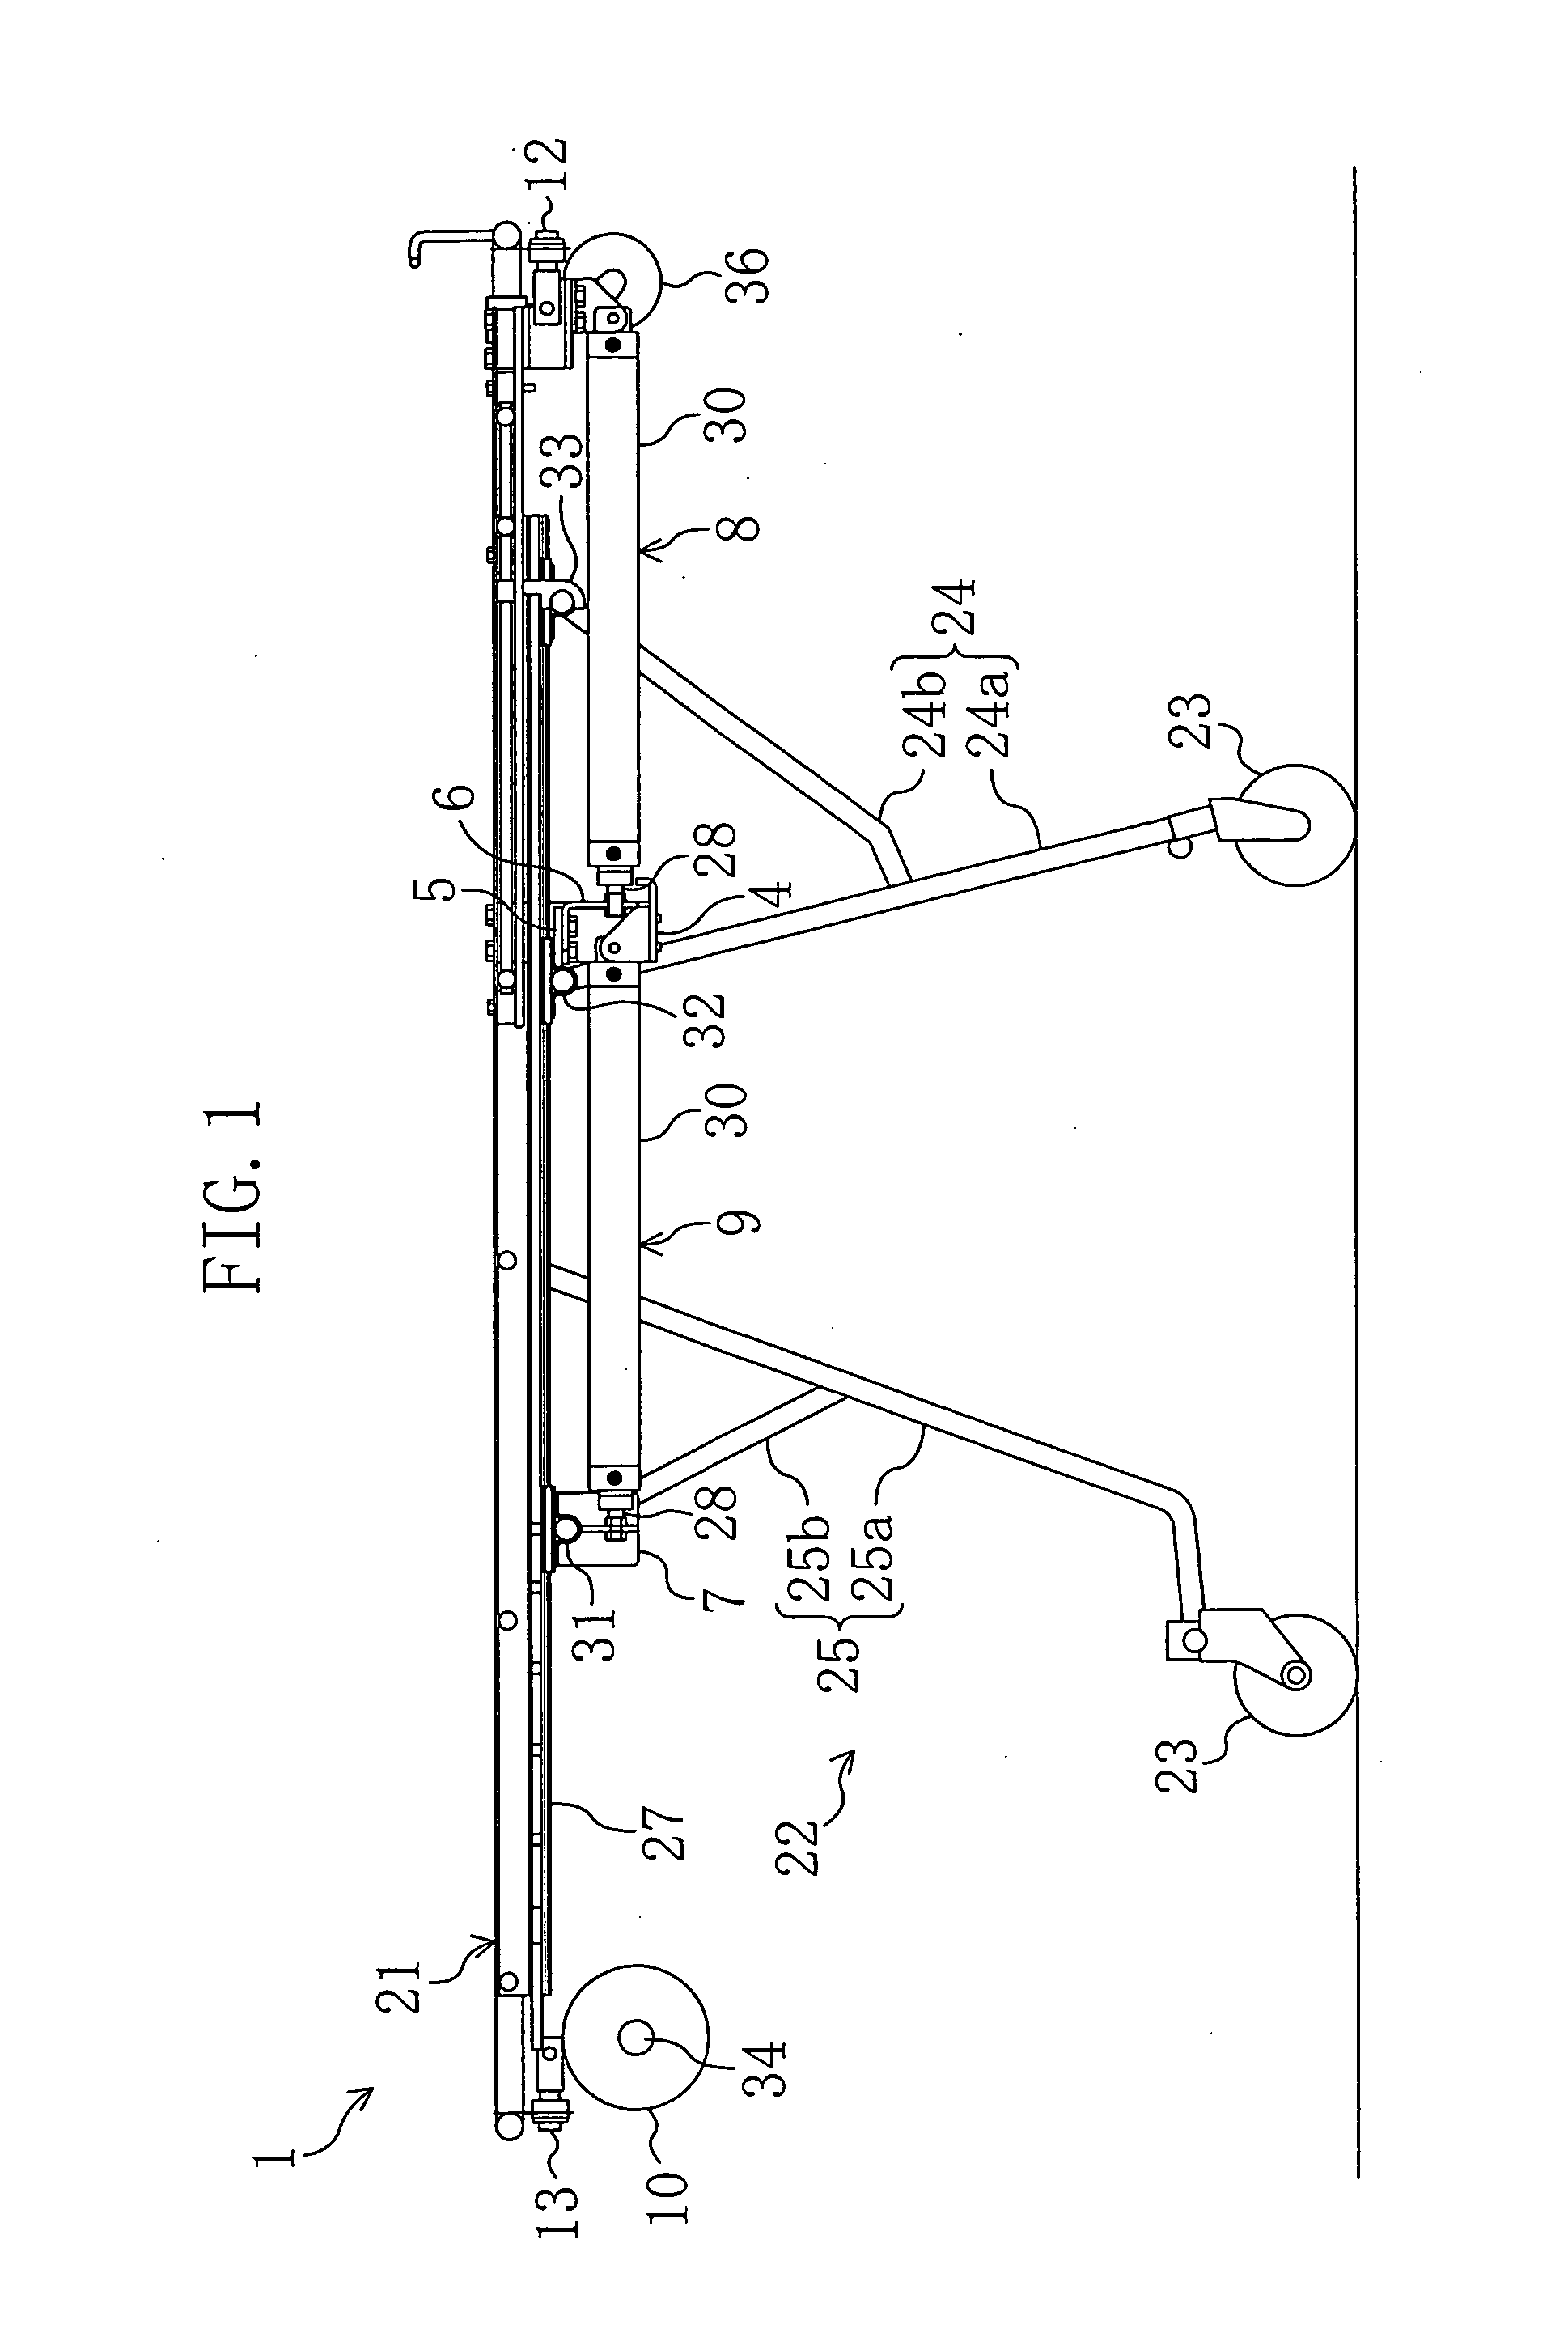 Stretcher, stretcher system and method for using the system